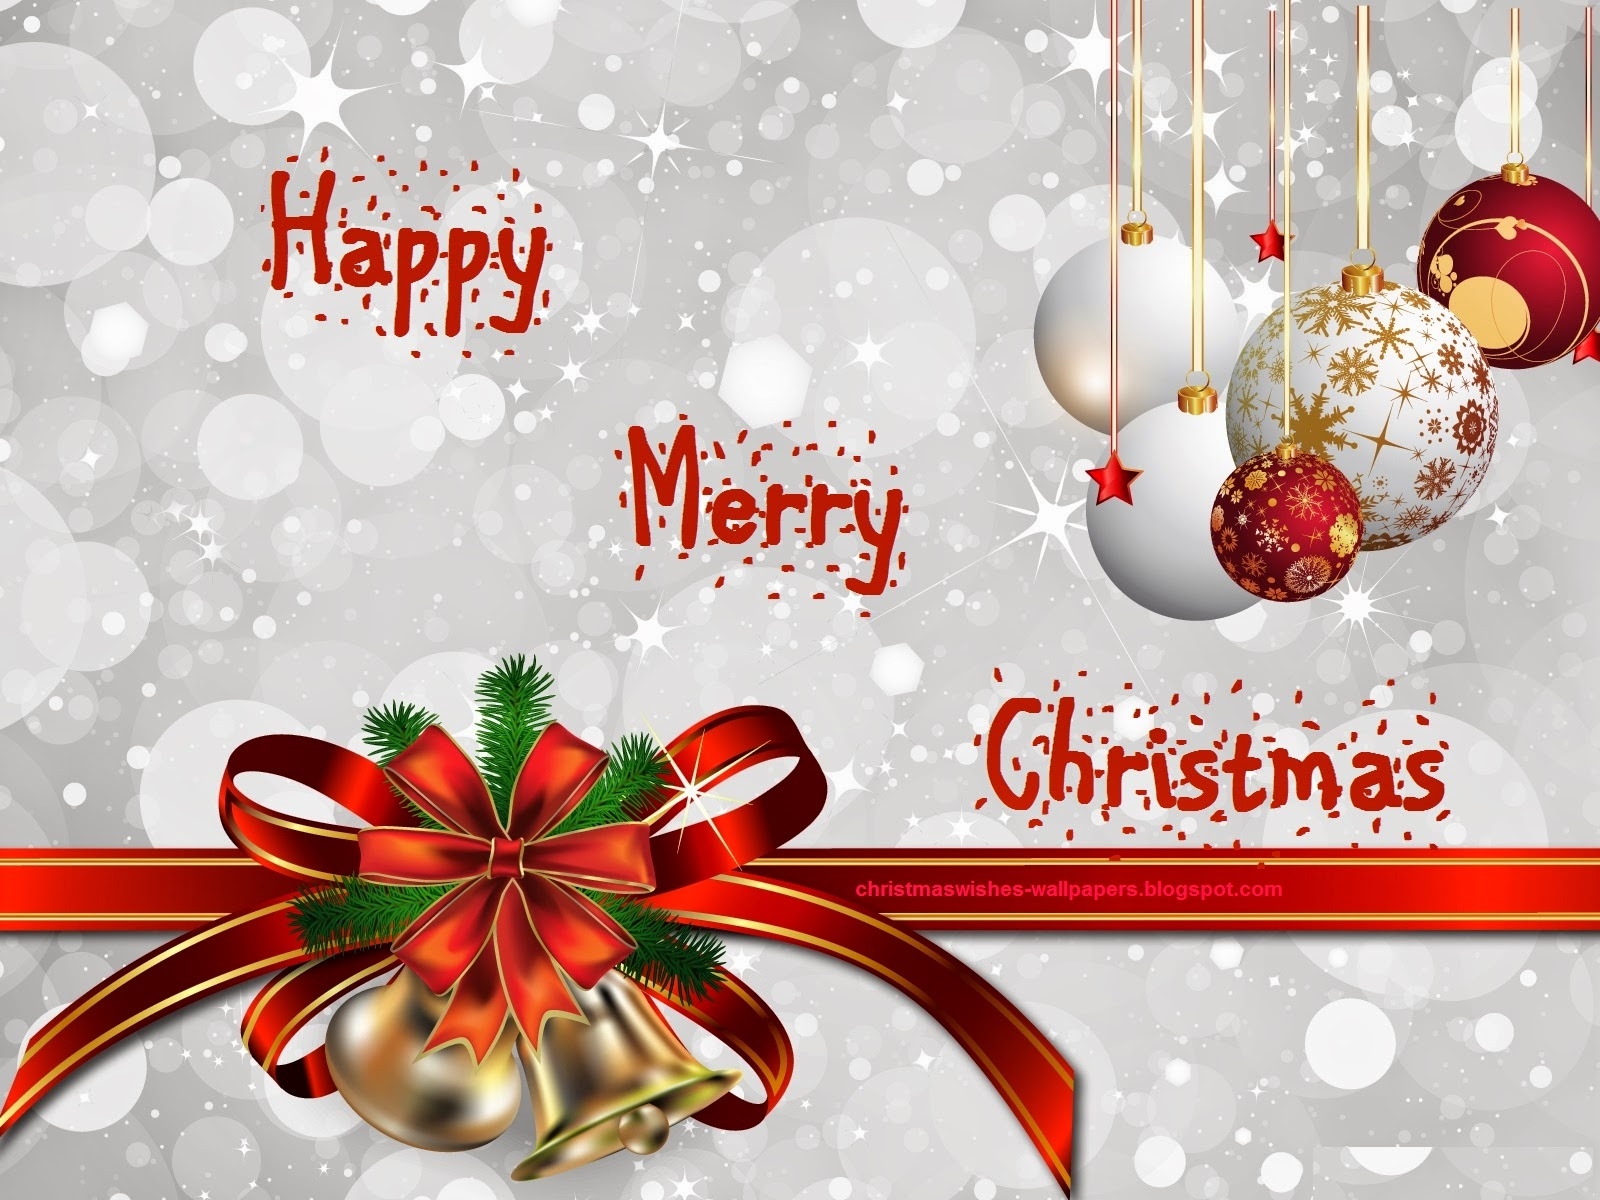 Wishes And Messages - Advance Merry Christmas , HD Wallpaper & Backgrounds